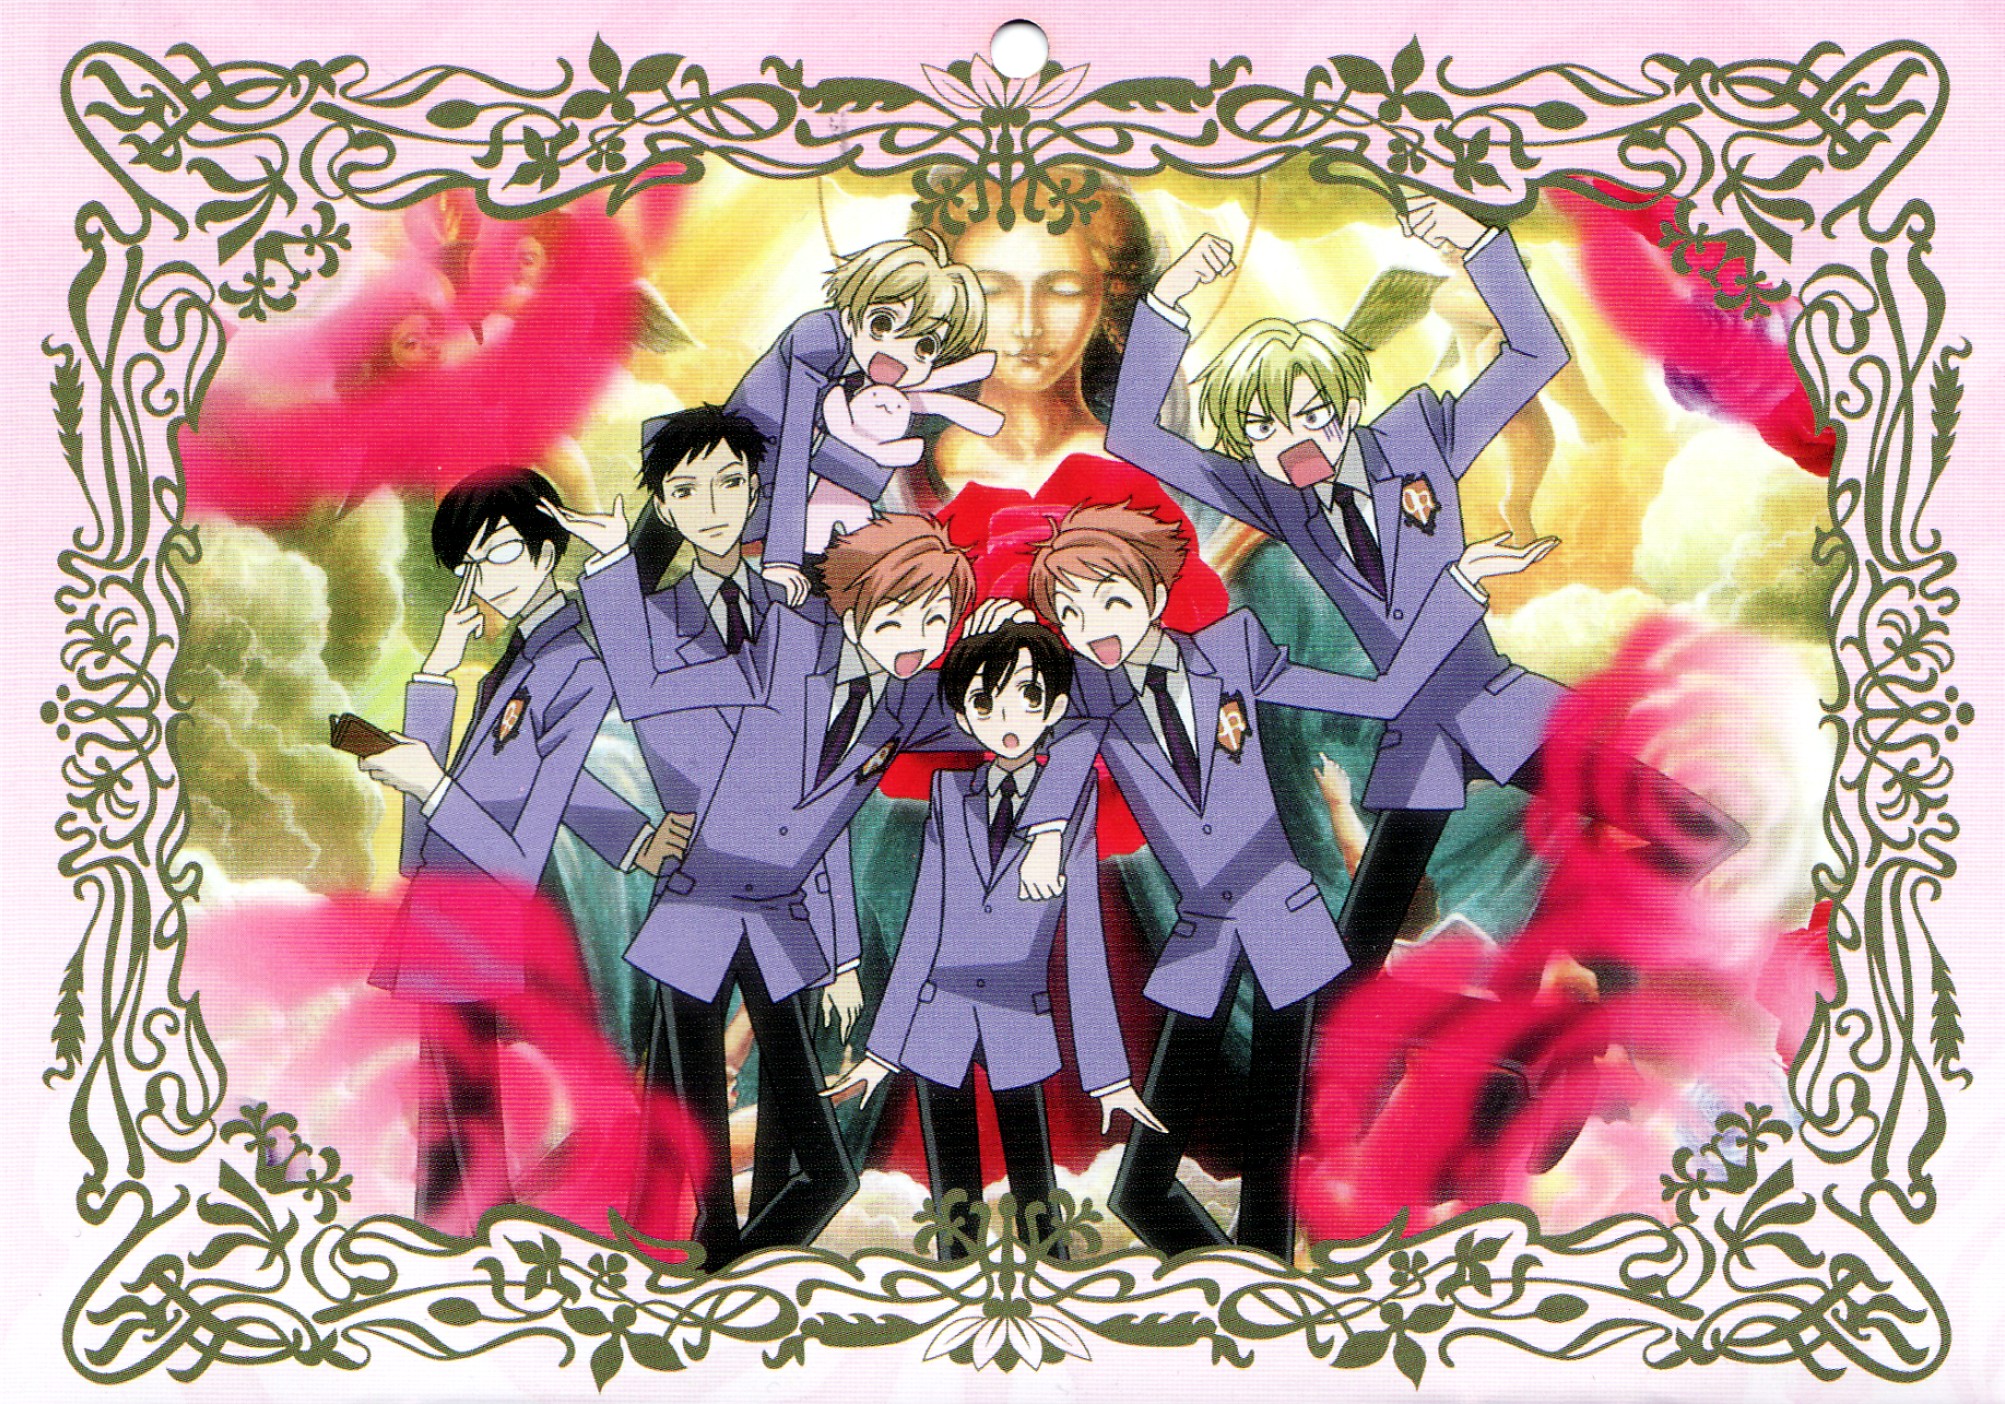 Ouran High School Host Club characters pose together in this colorful HD desktop wallpaper with floral accents.